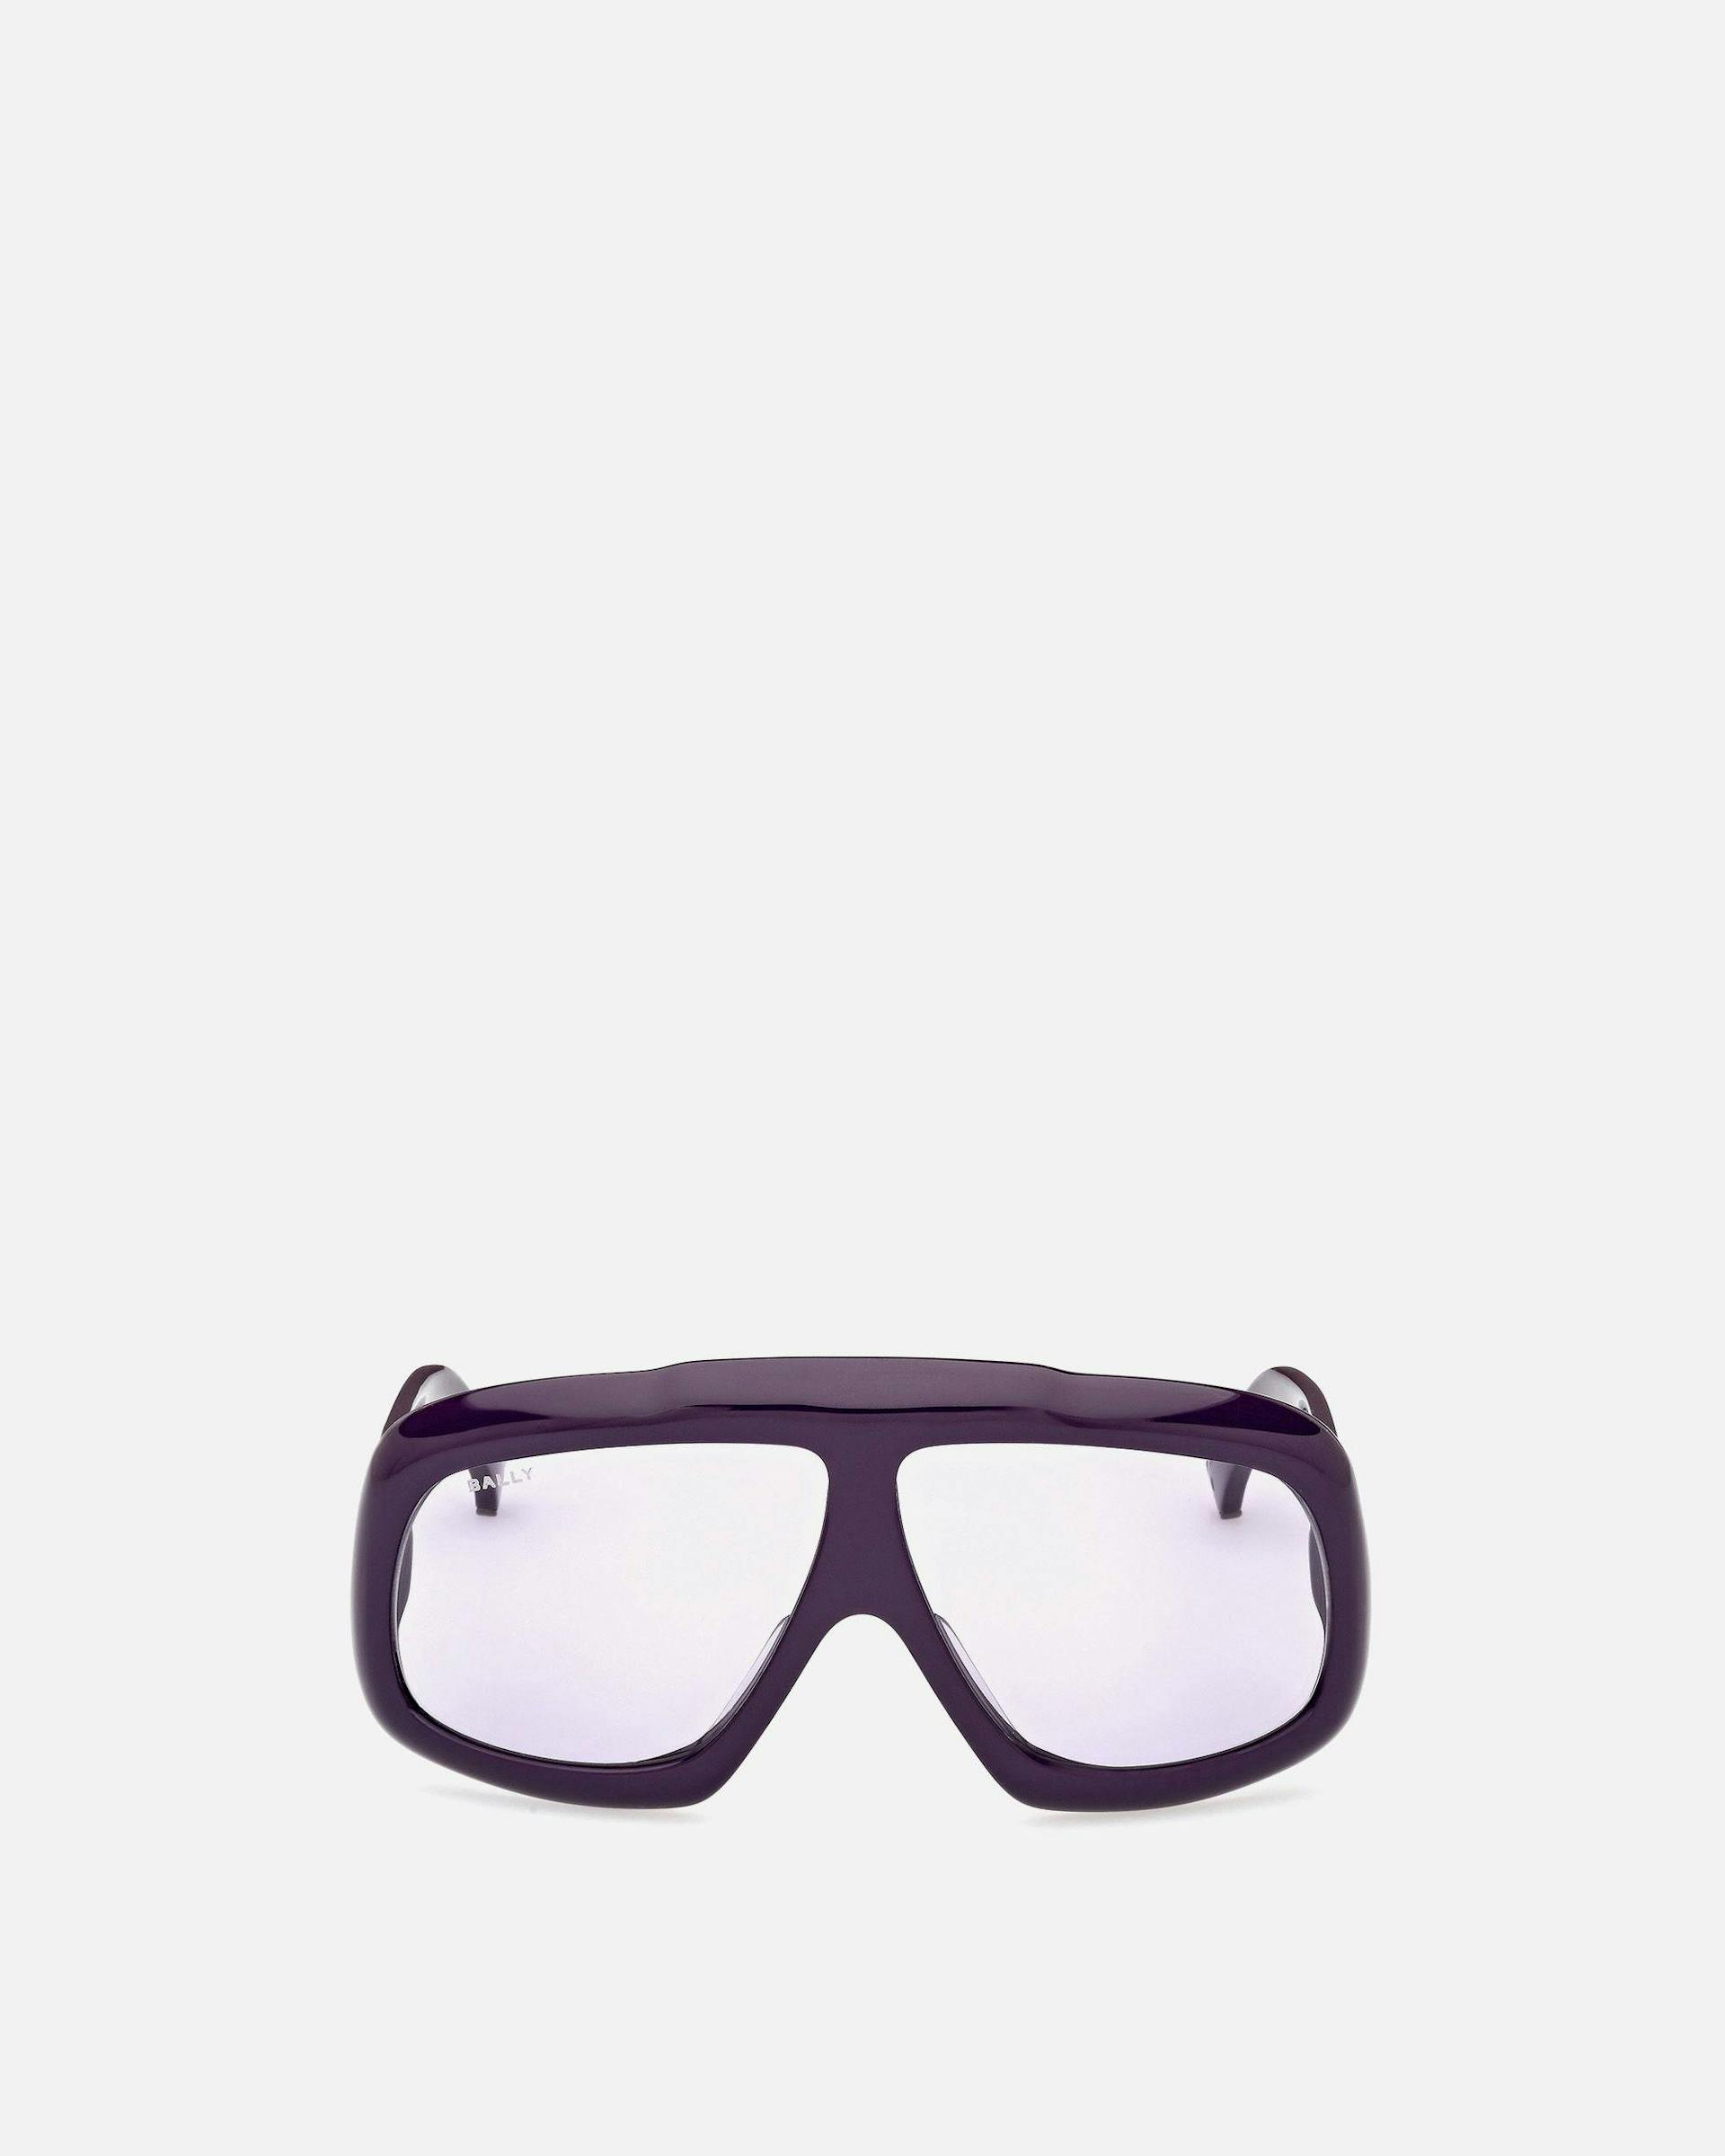 Eyger Acetate Sunglasses in Purple and Lilac | Bally | Still Life Front